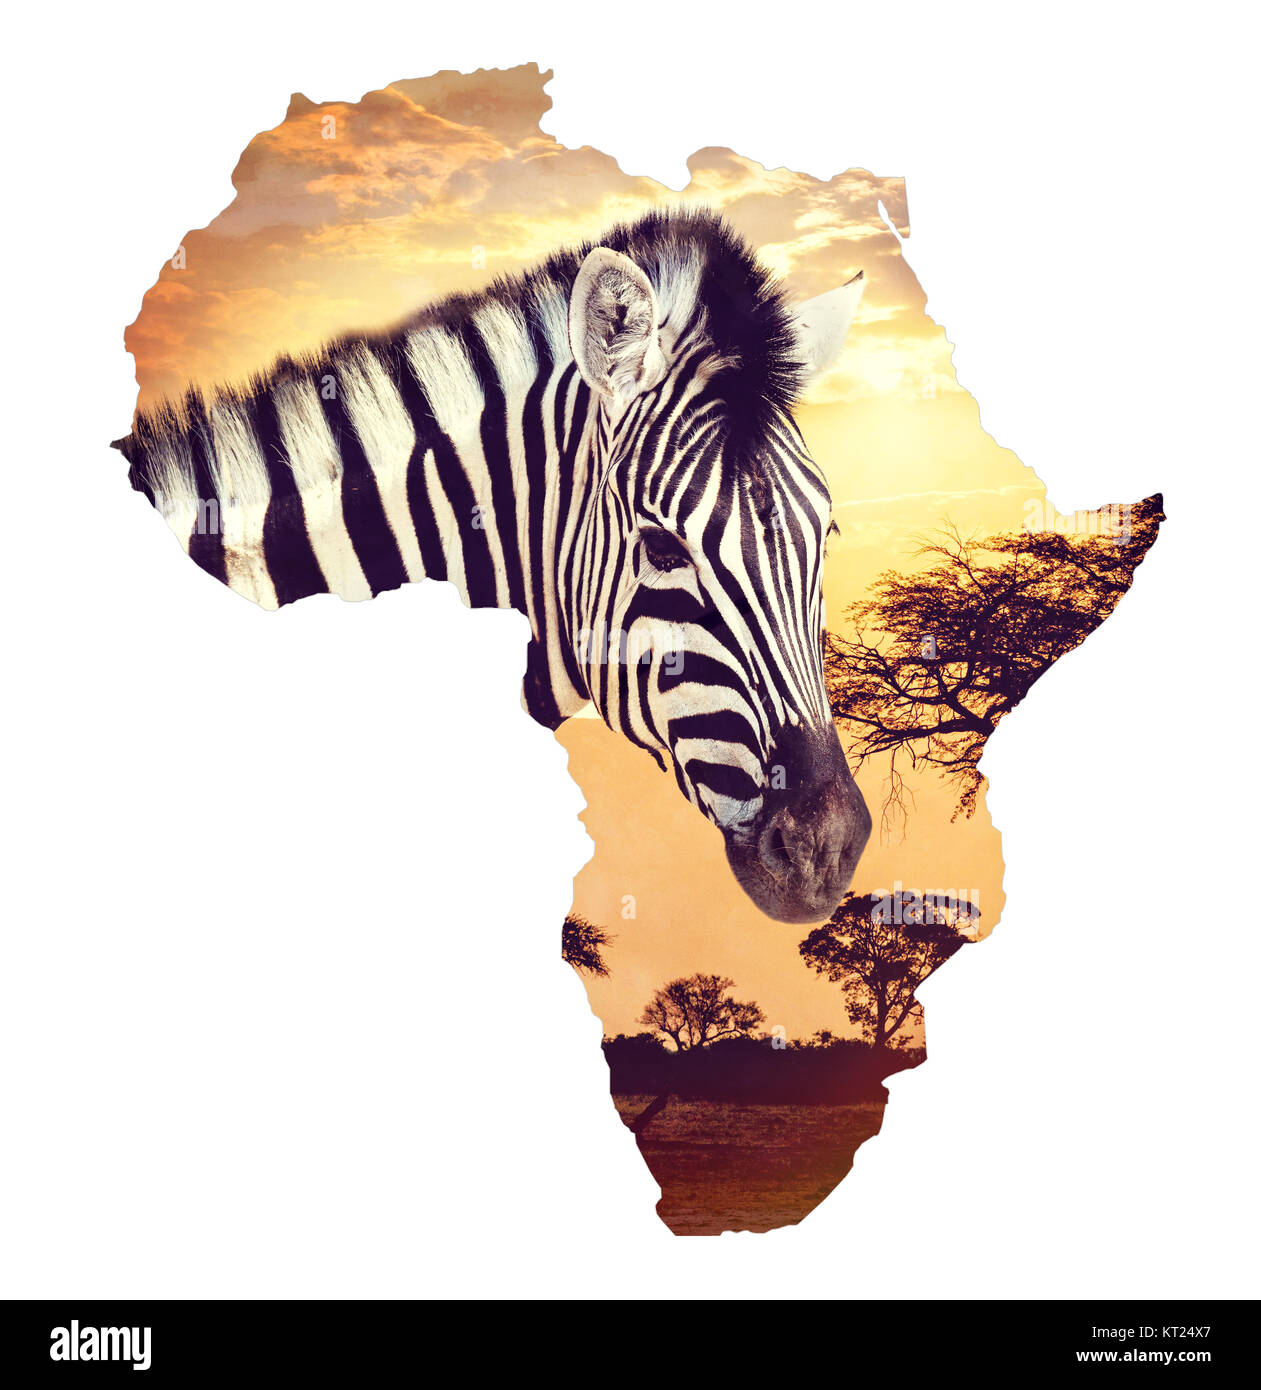 Zebra portrait on african sunset with acacia background. Map, continent of africa. Wildlife and wilderness Map of africa concept Stock Photo